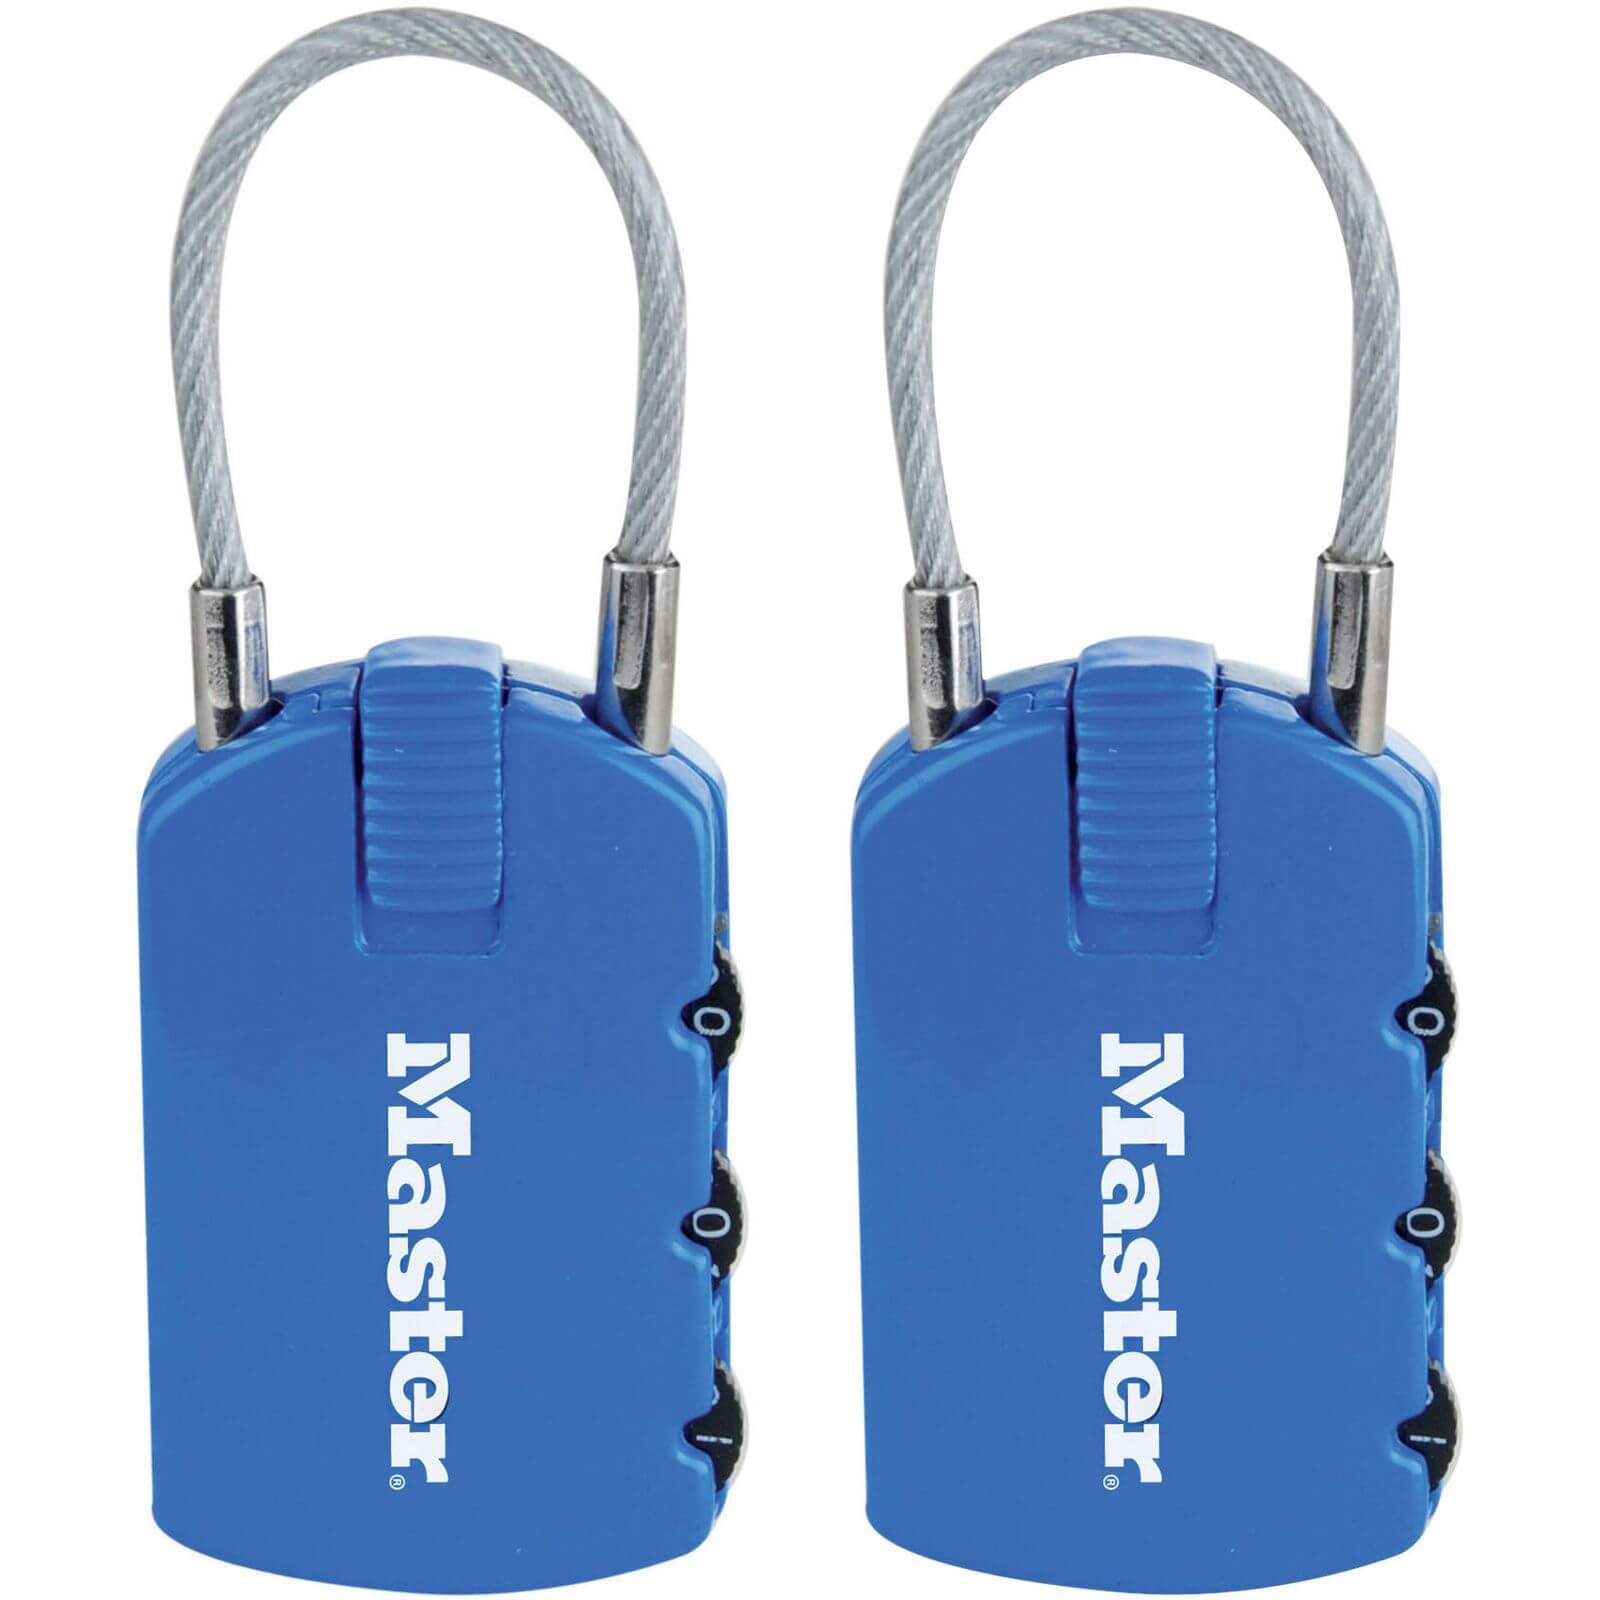 Master Lock 2-in-1 Padlocks with ID Tags - 2 Pack